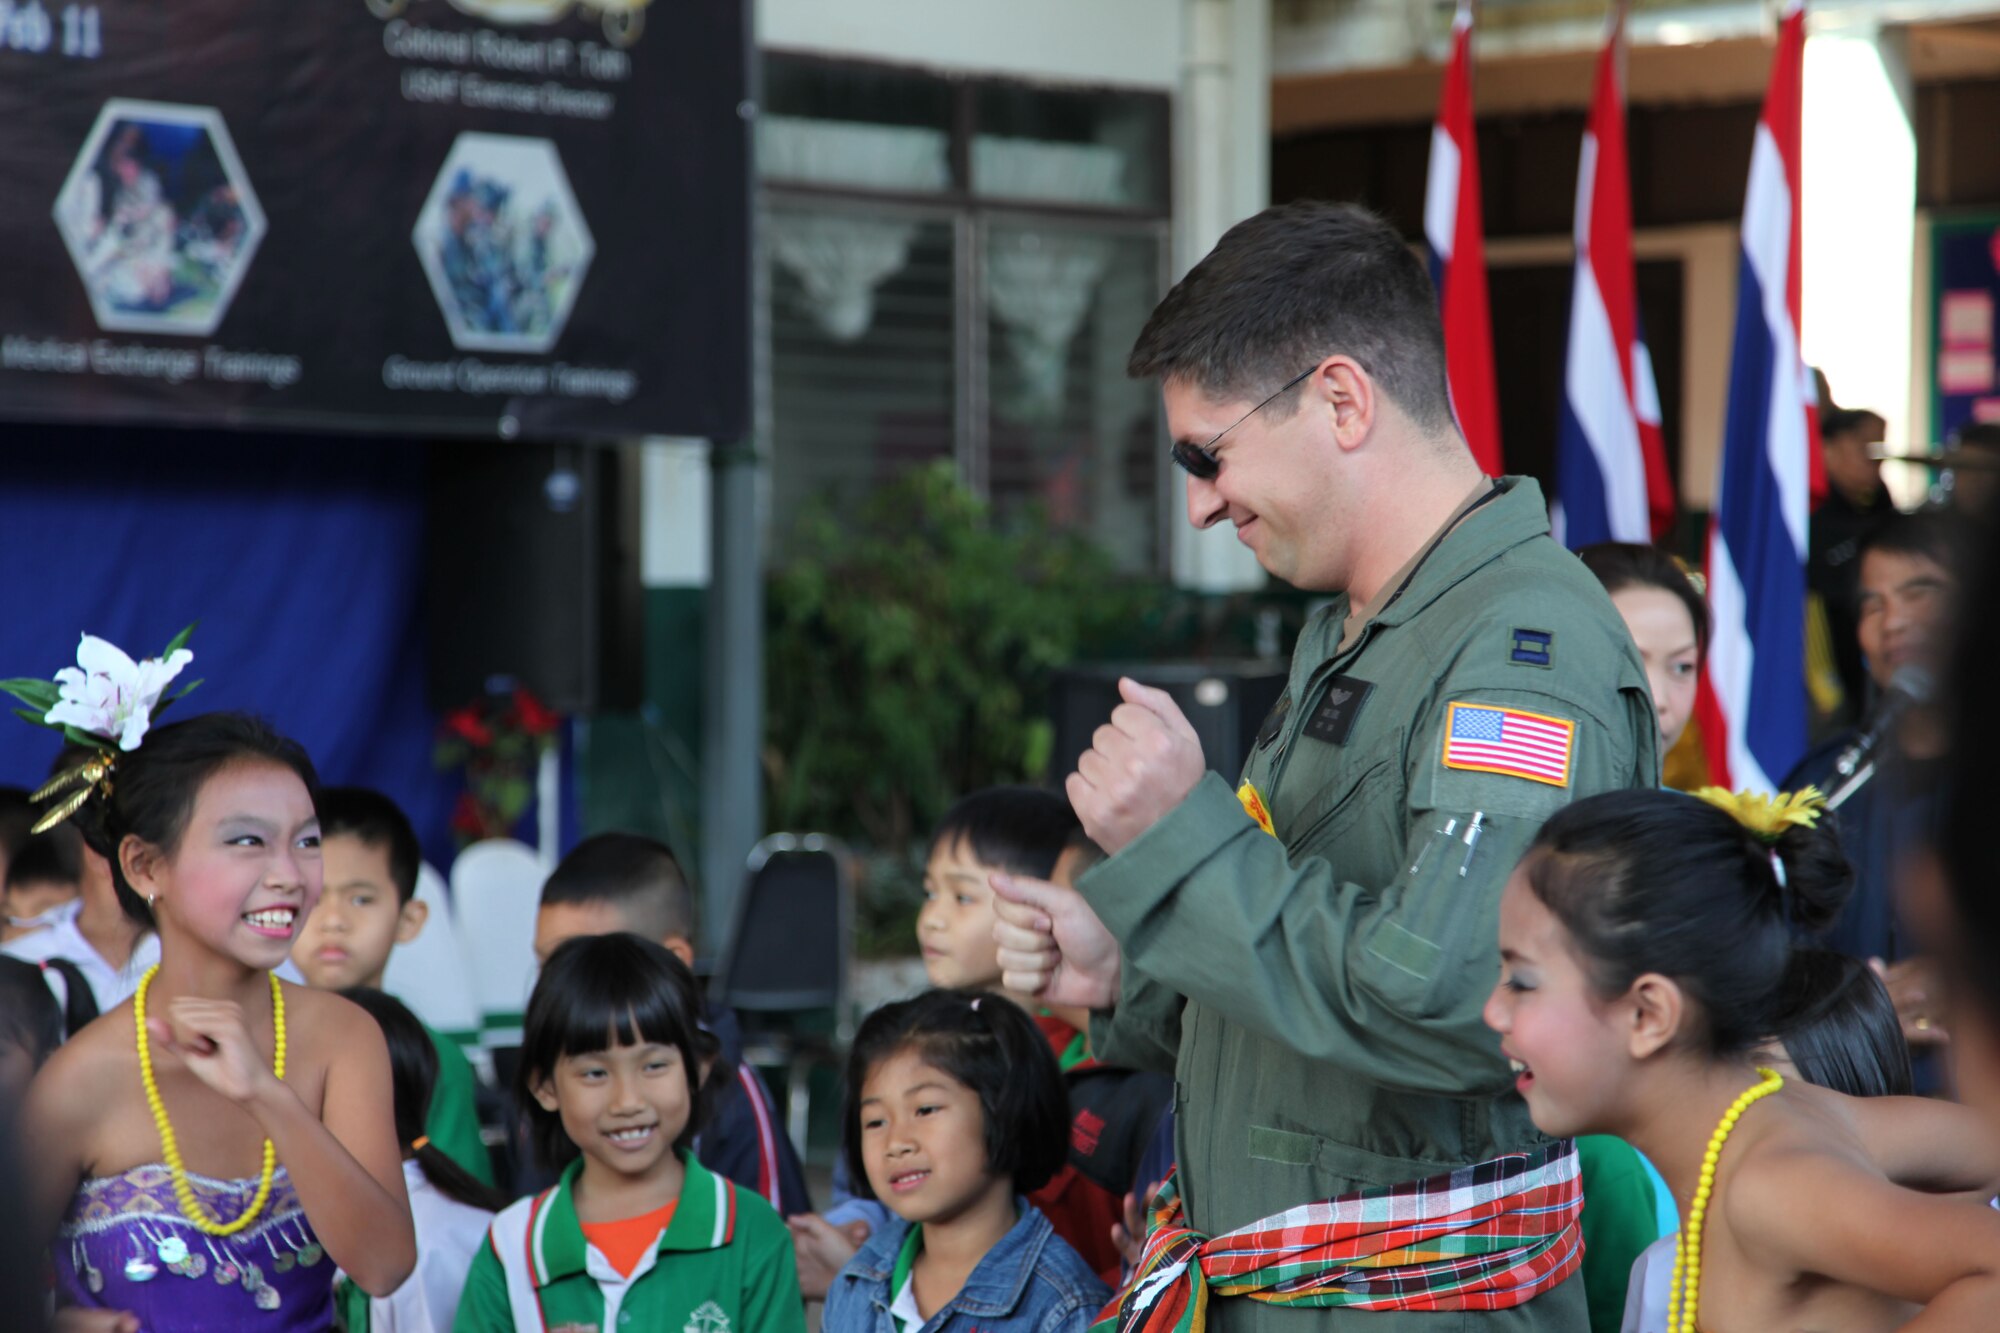 UDON THANI, Thailand -- Capt. James Demis, a pilot with the 1st Special Operations Squadron, laughs as he dances with children during a visit to the Songtam Witthaya School here Jan. 31. Airmen from the 353rd Special Operations Group joined Royal Thai Air Force members on a visit to the school to donate school supplies and sporting goods. During the visit, children from the school treated the U.S. and Royal Thai Air Force members to musical performances and dances. (Courtesy photo)